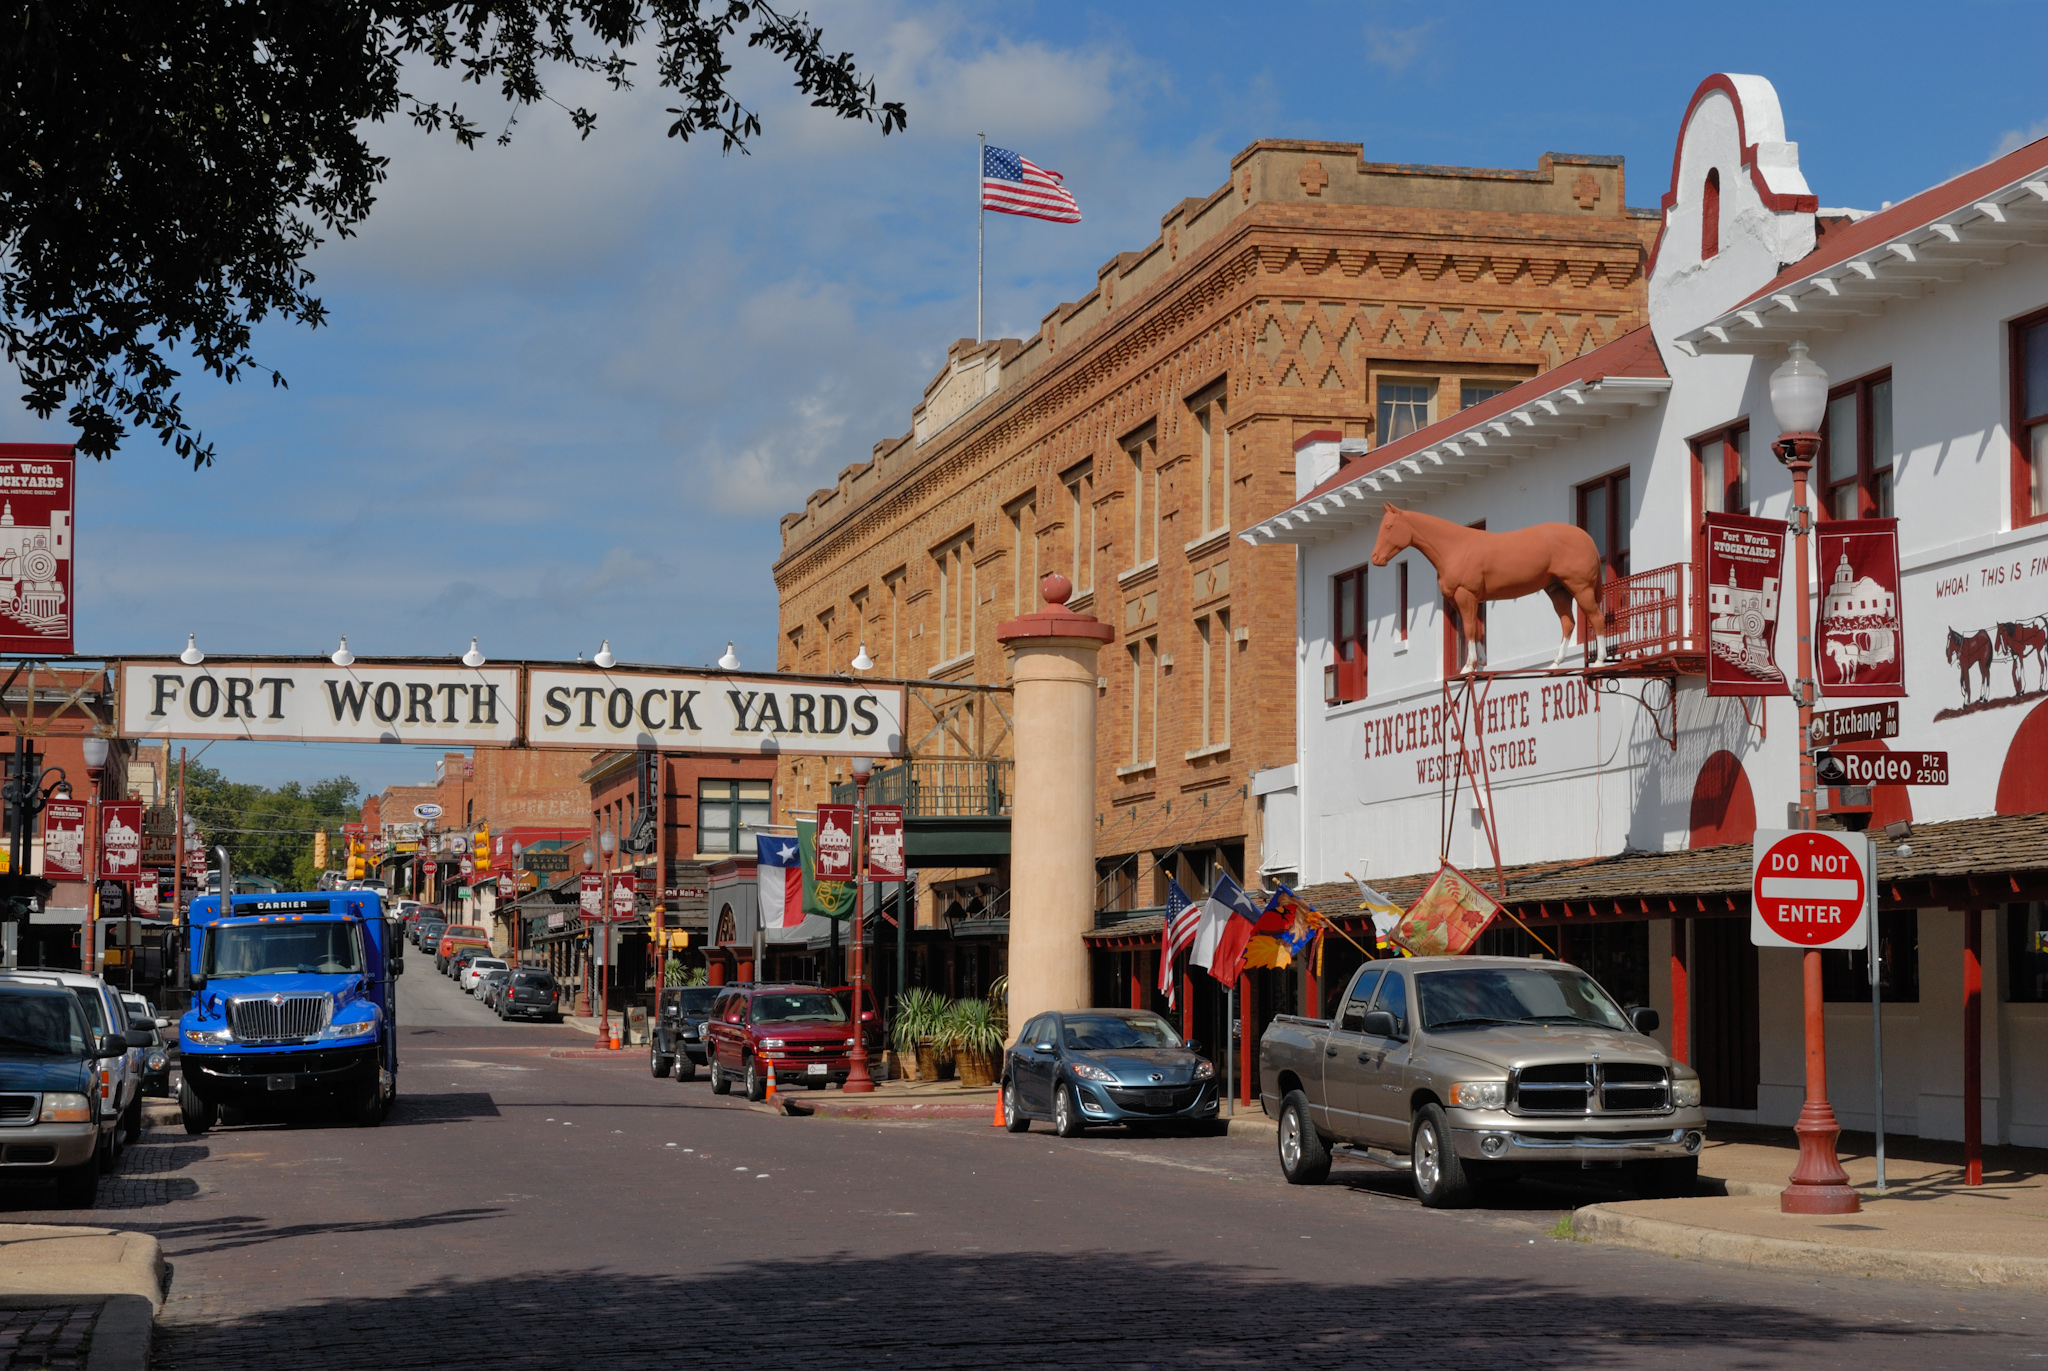 Photo of Fort Worth sign